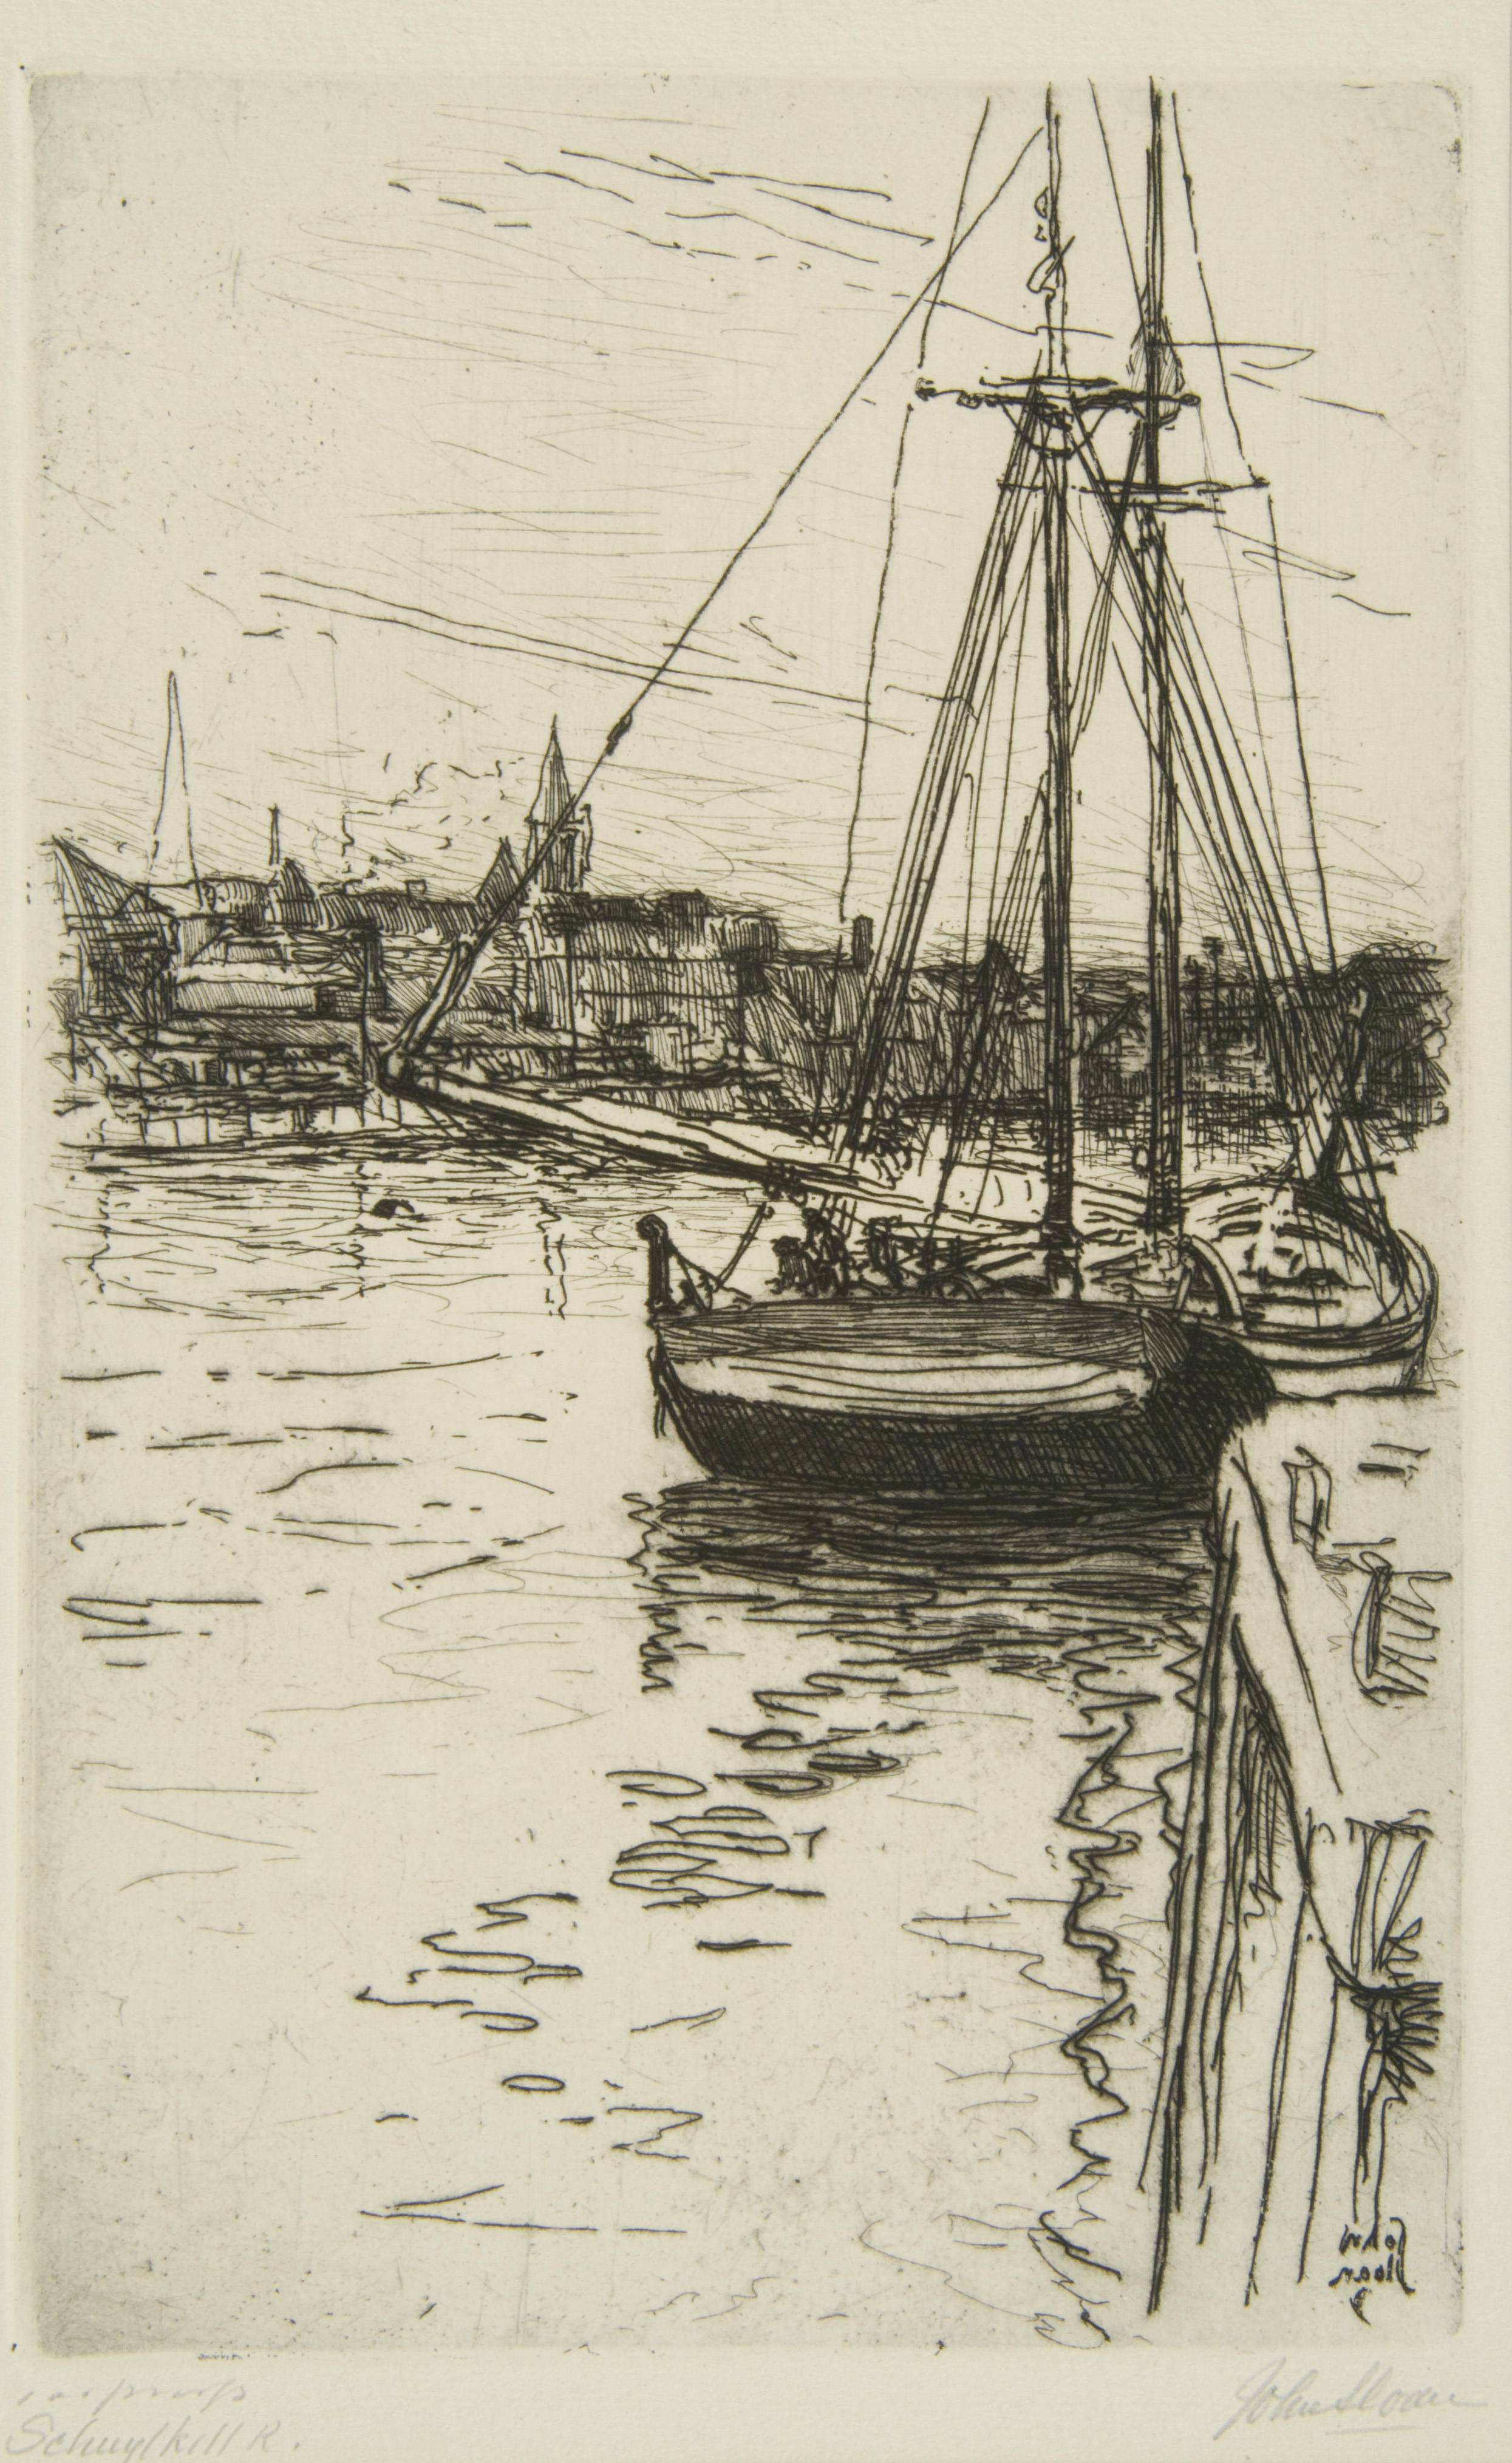 Etching of sailboat on water with buildings in background